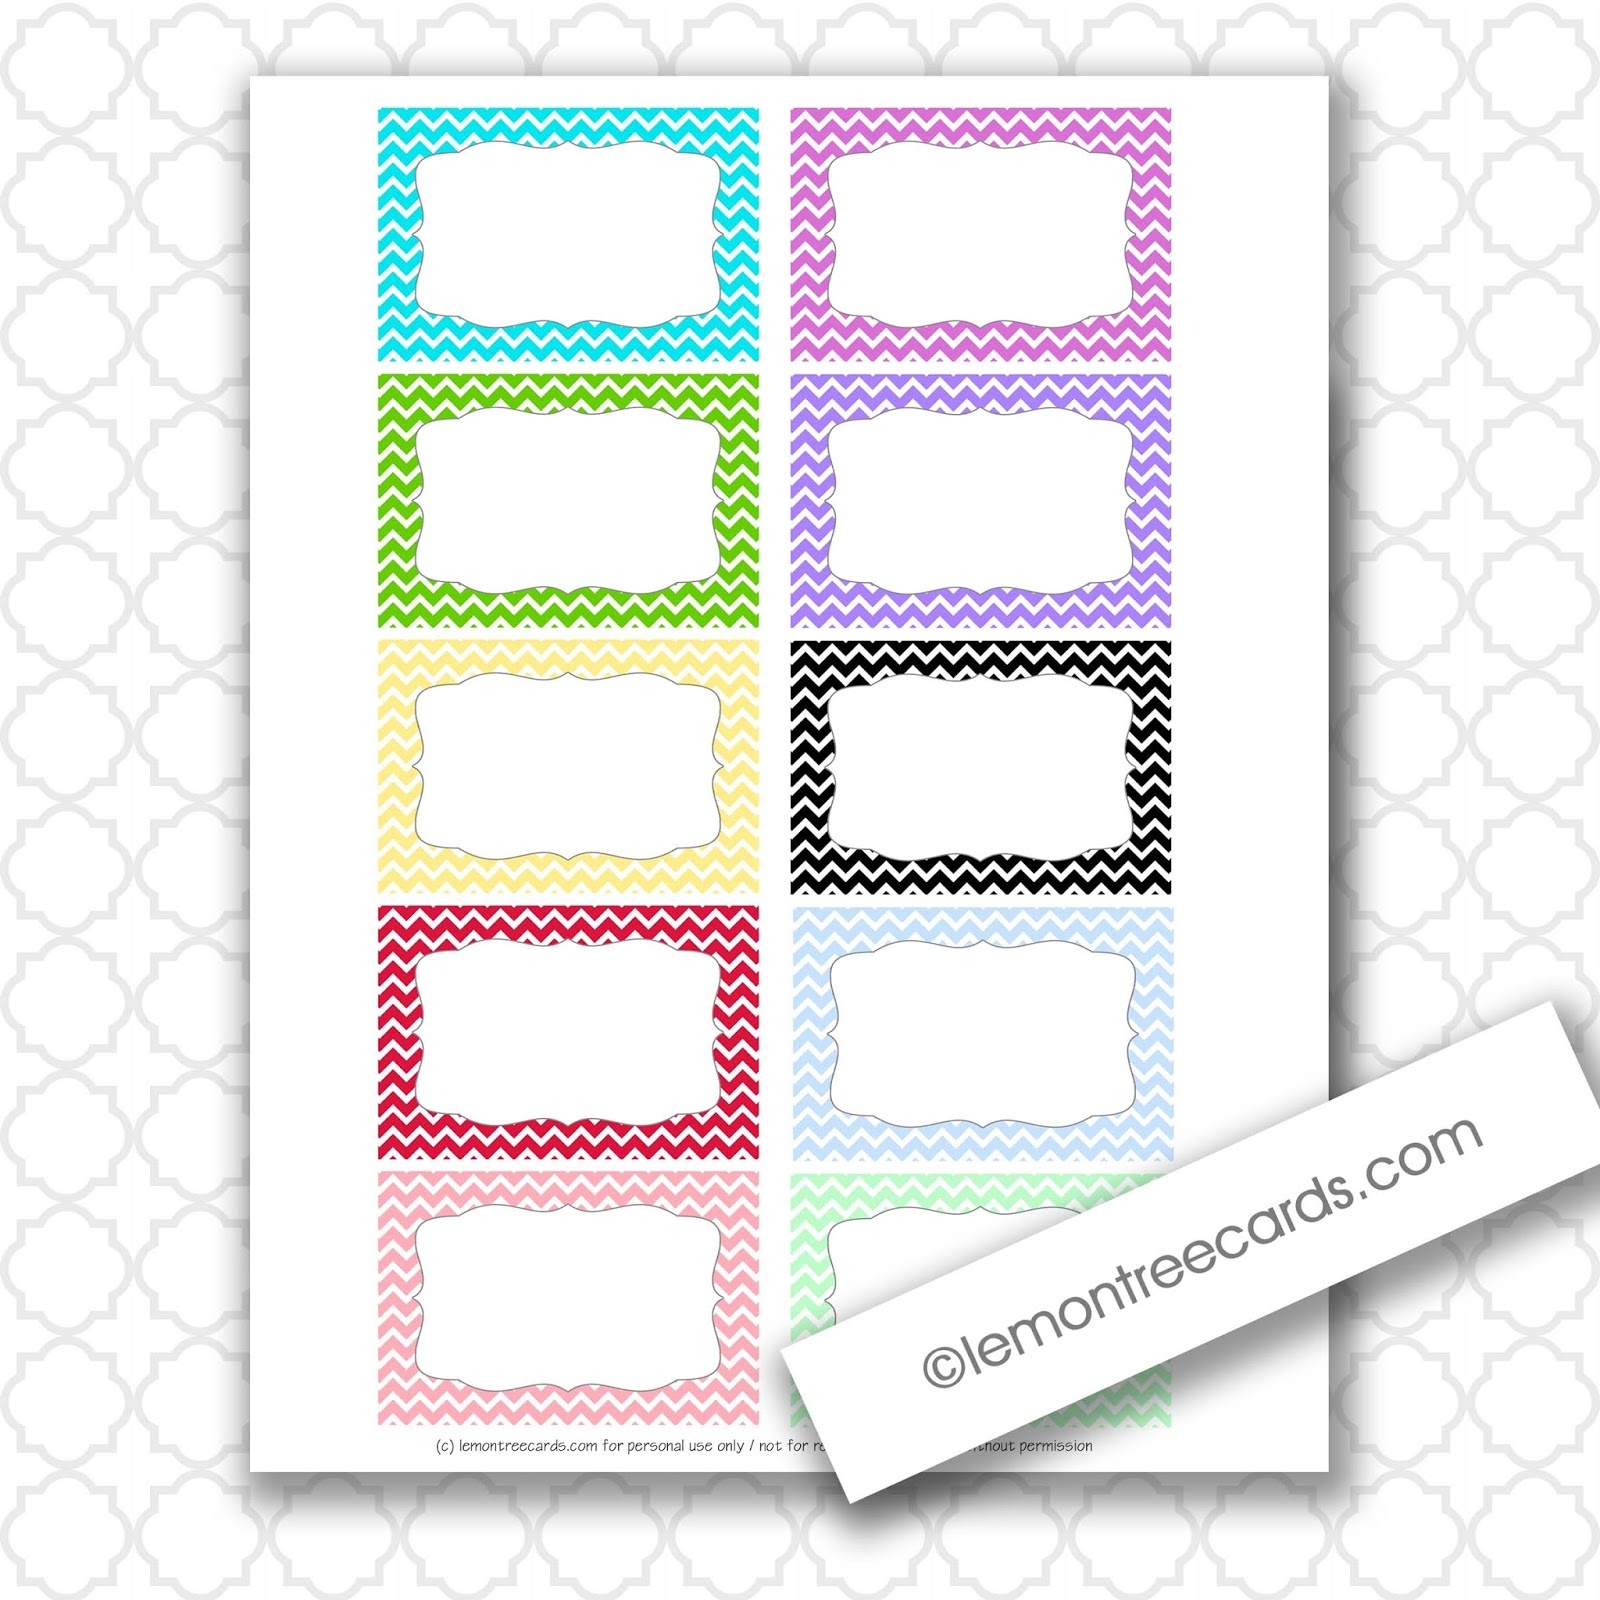 27 Images Of Index Cards Printable Editable Template Contest Entry - Free Printable Blank Index Cards